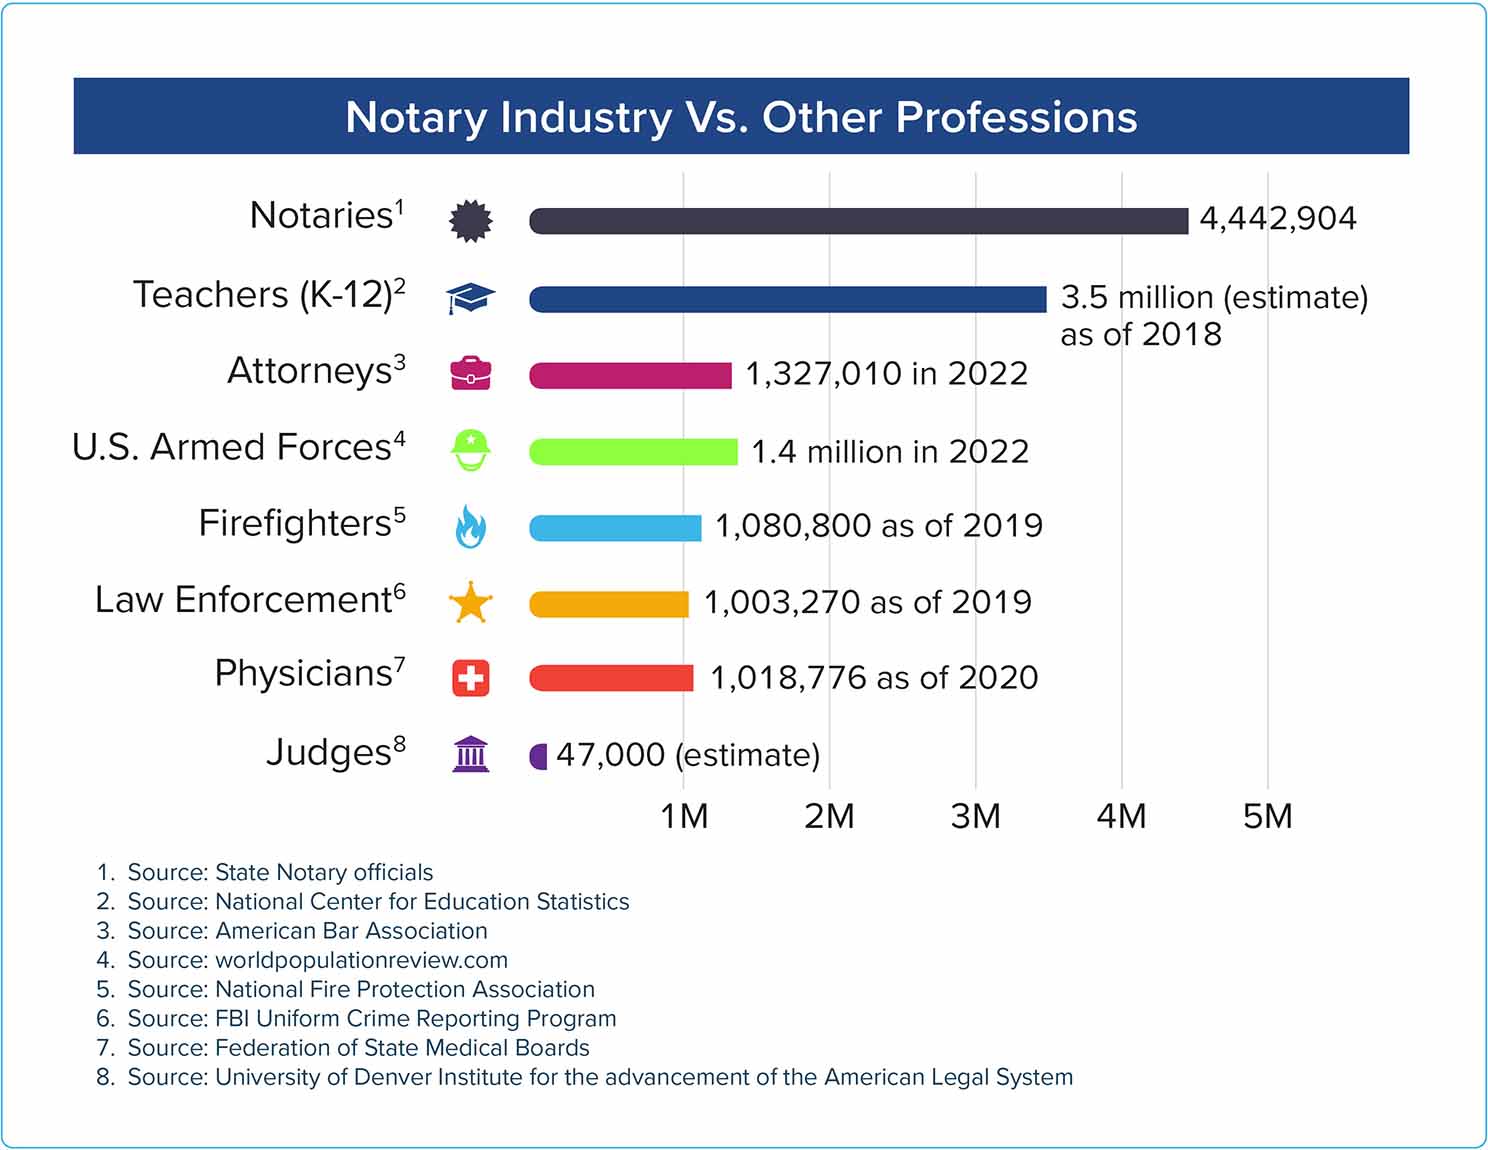 Bar Chart showing Notaries outnumbering other professions in the US